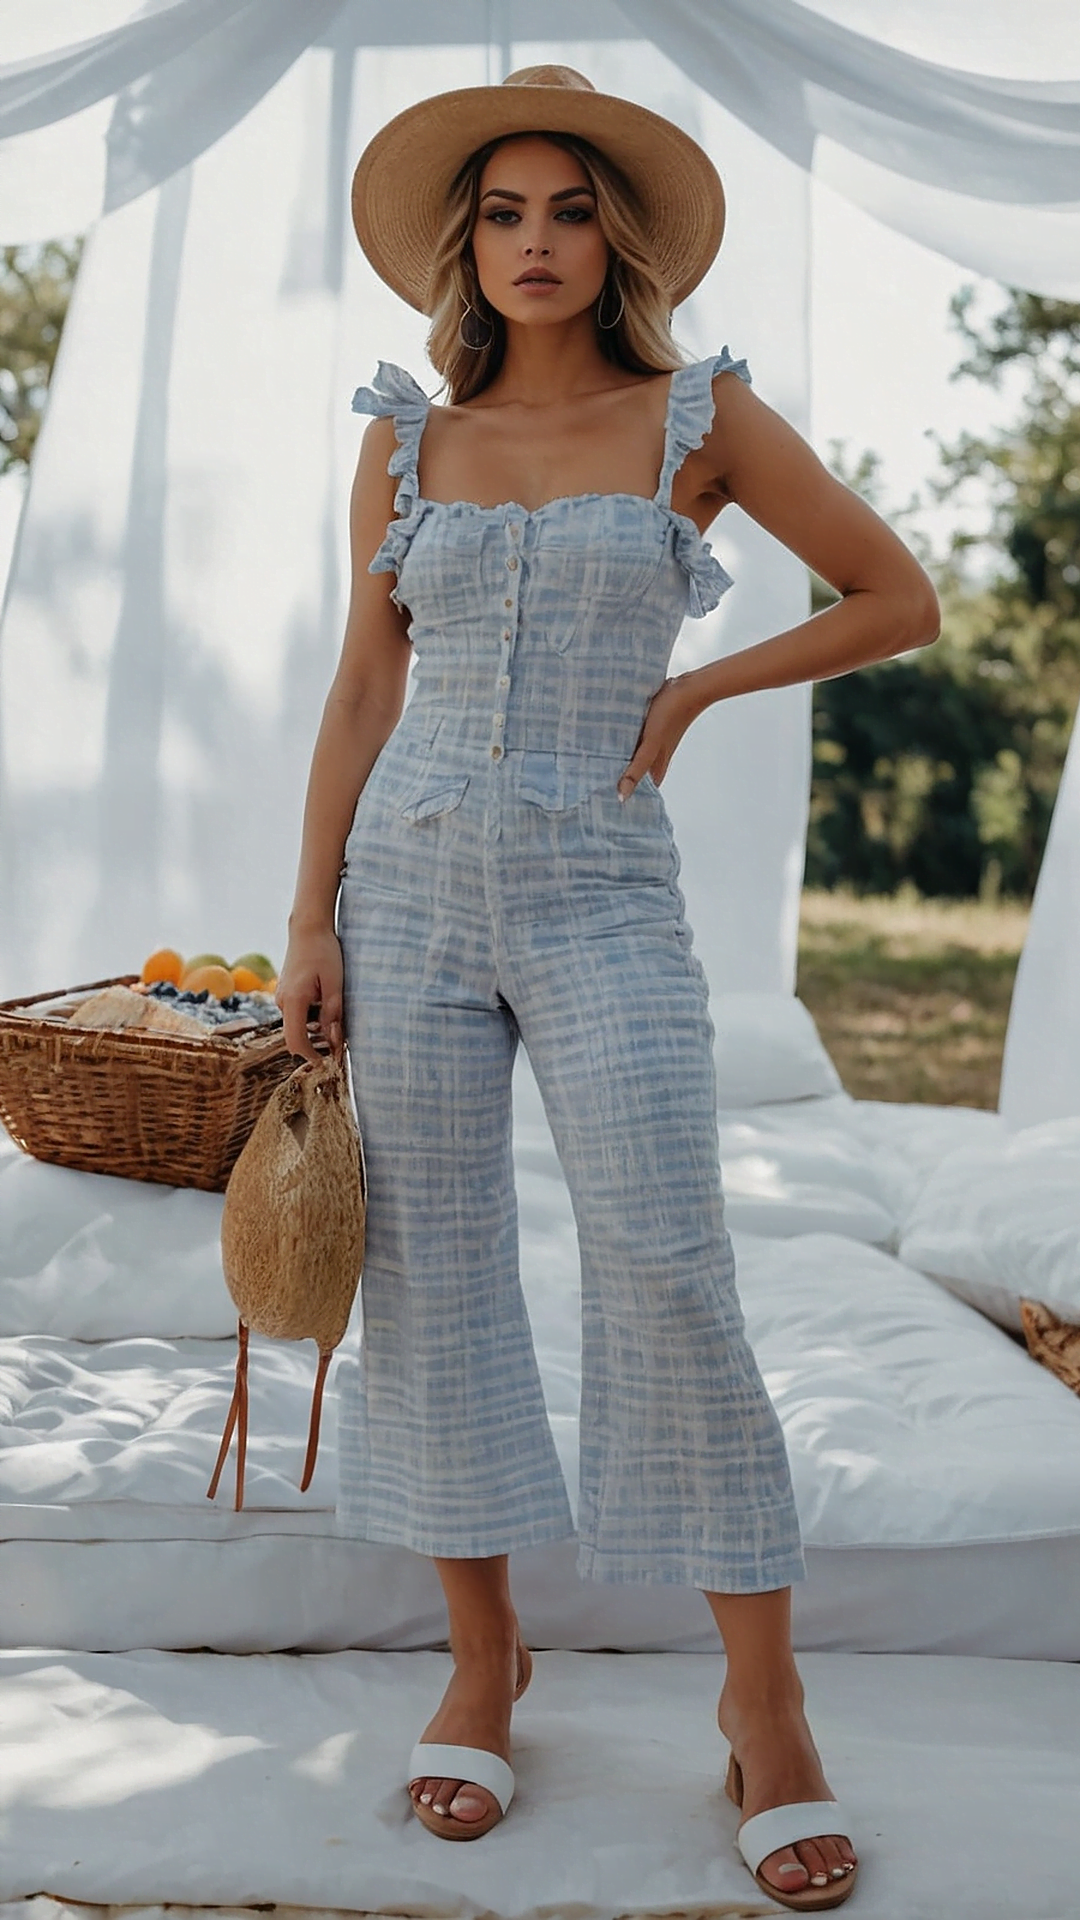 Classy Denim Outfit Ideas for a Picnic